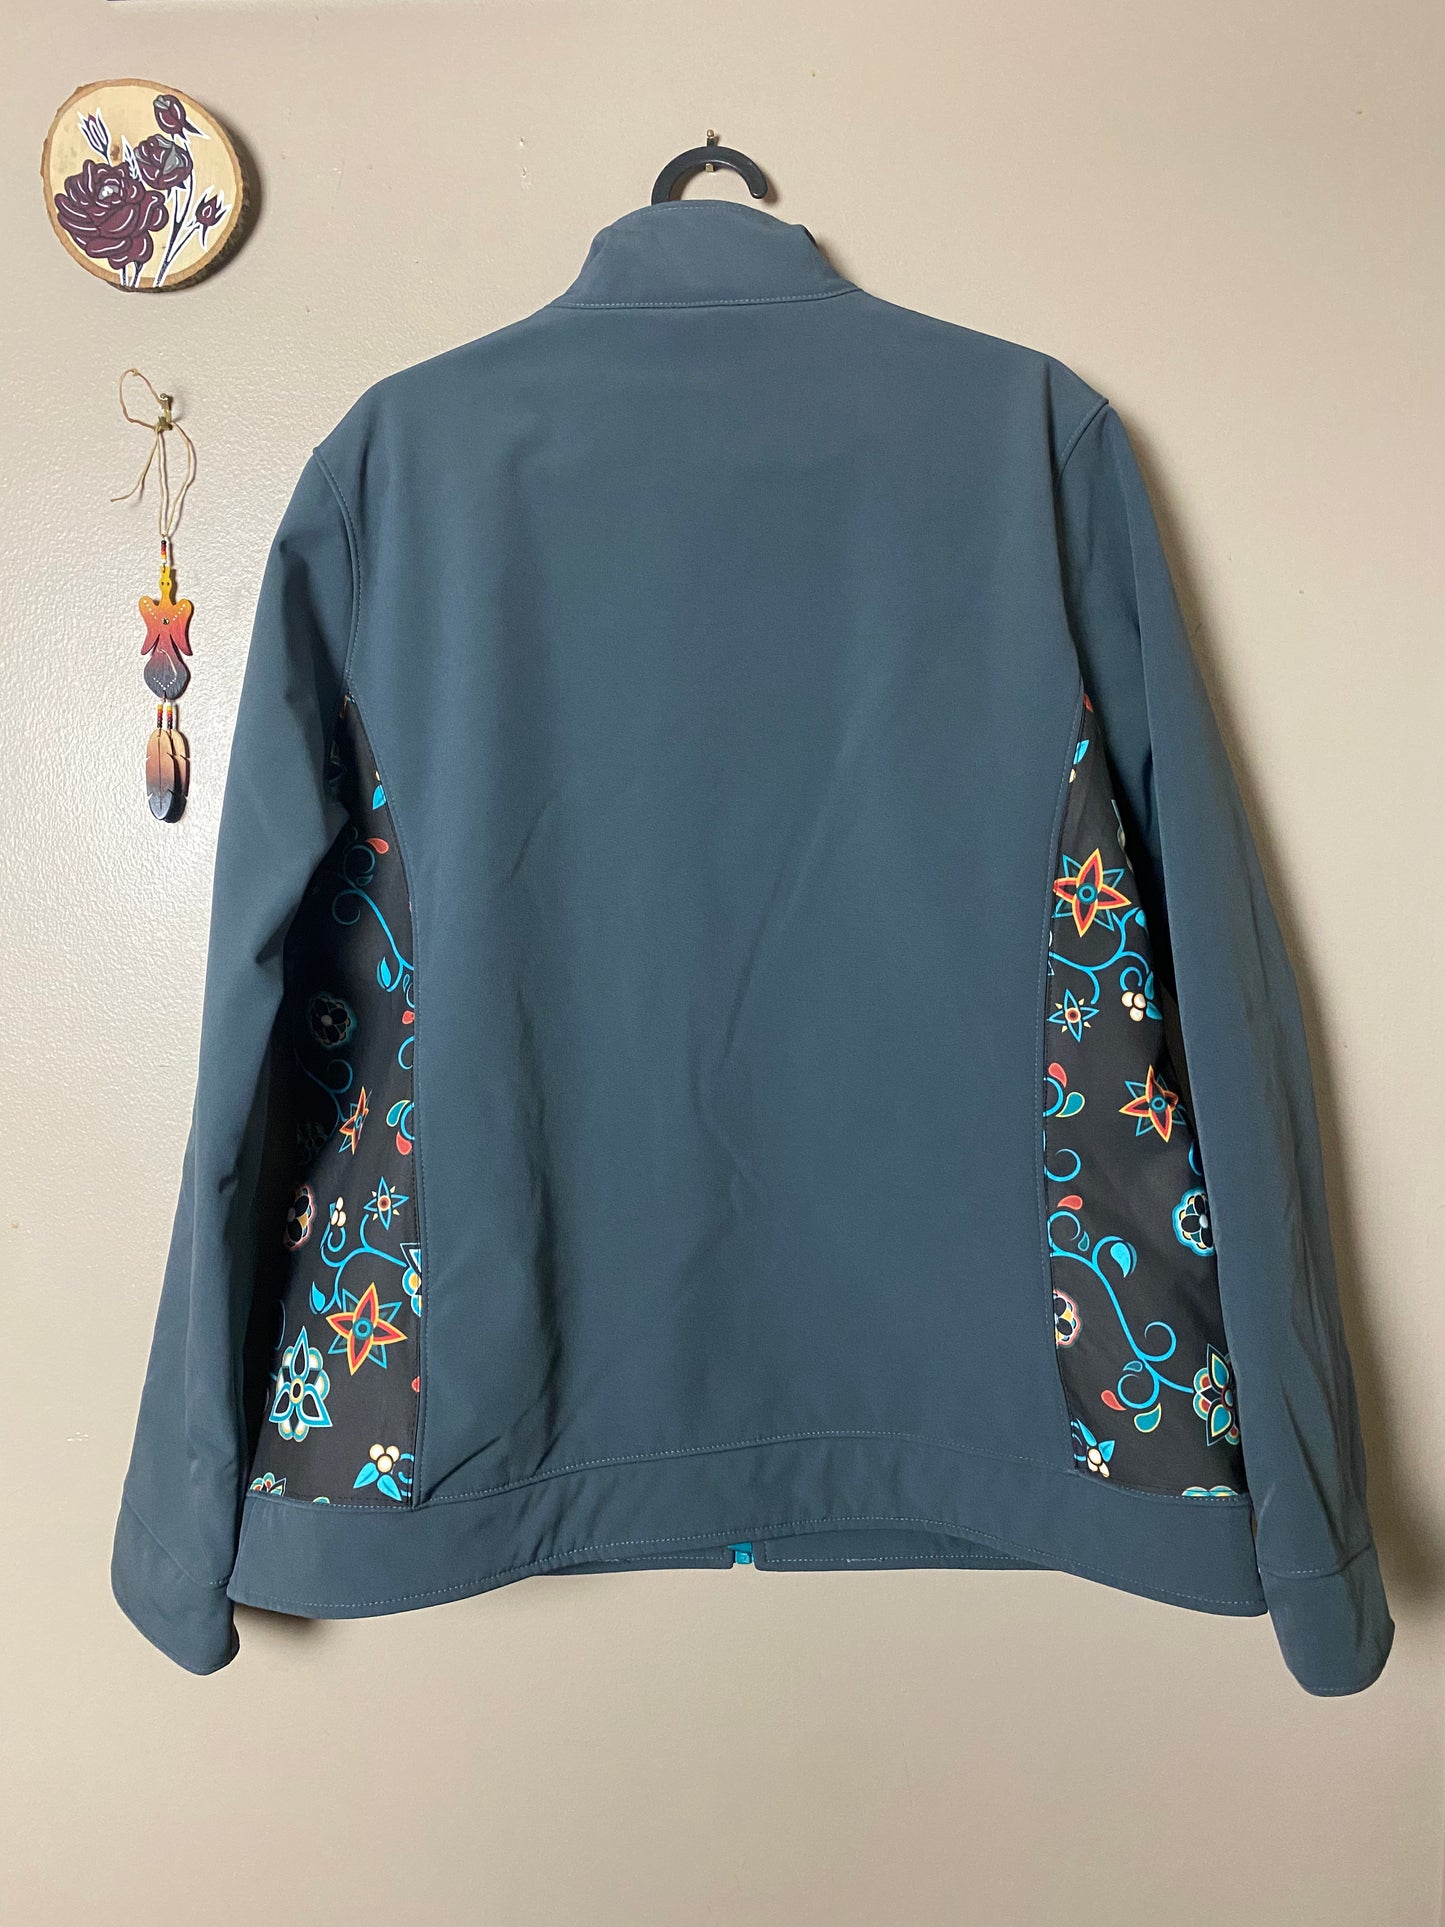 Upcycled Woman's Floral Jacket